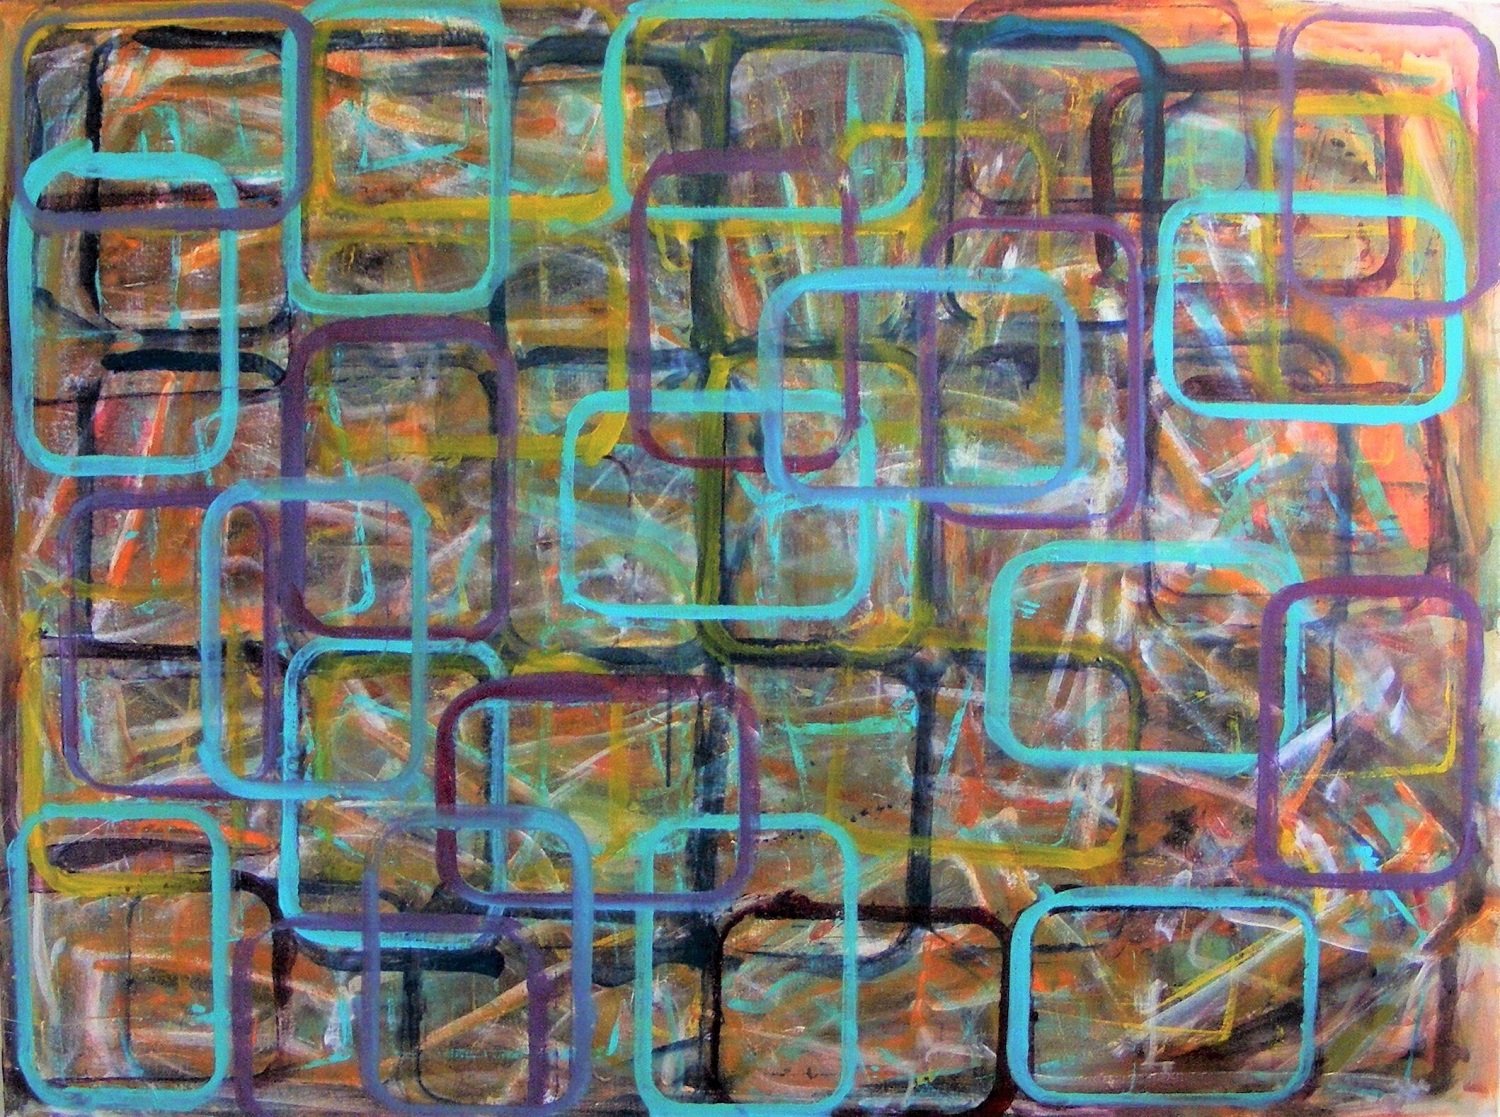  “Edgy” 36” x 48”; Acrylic paint on canvas.    Lots of rectangles that seem to be moving around nervously. 